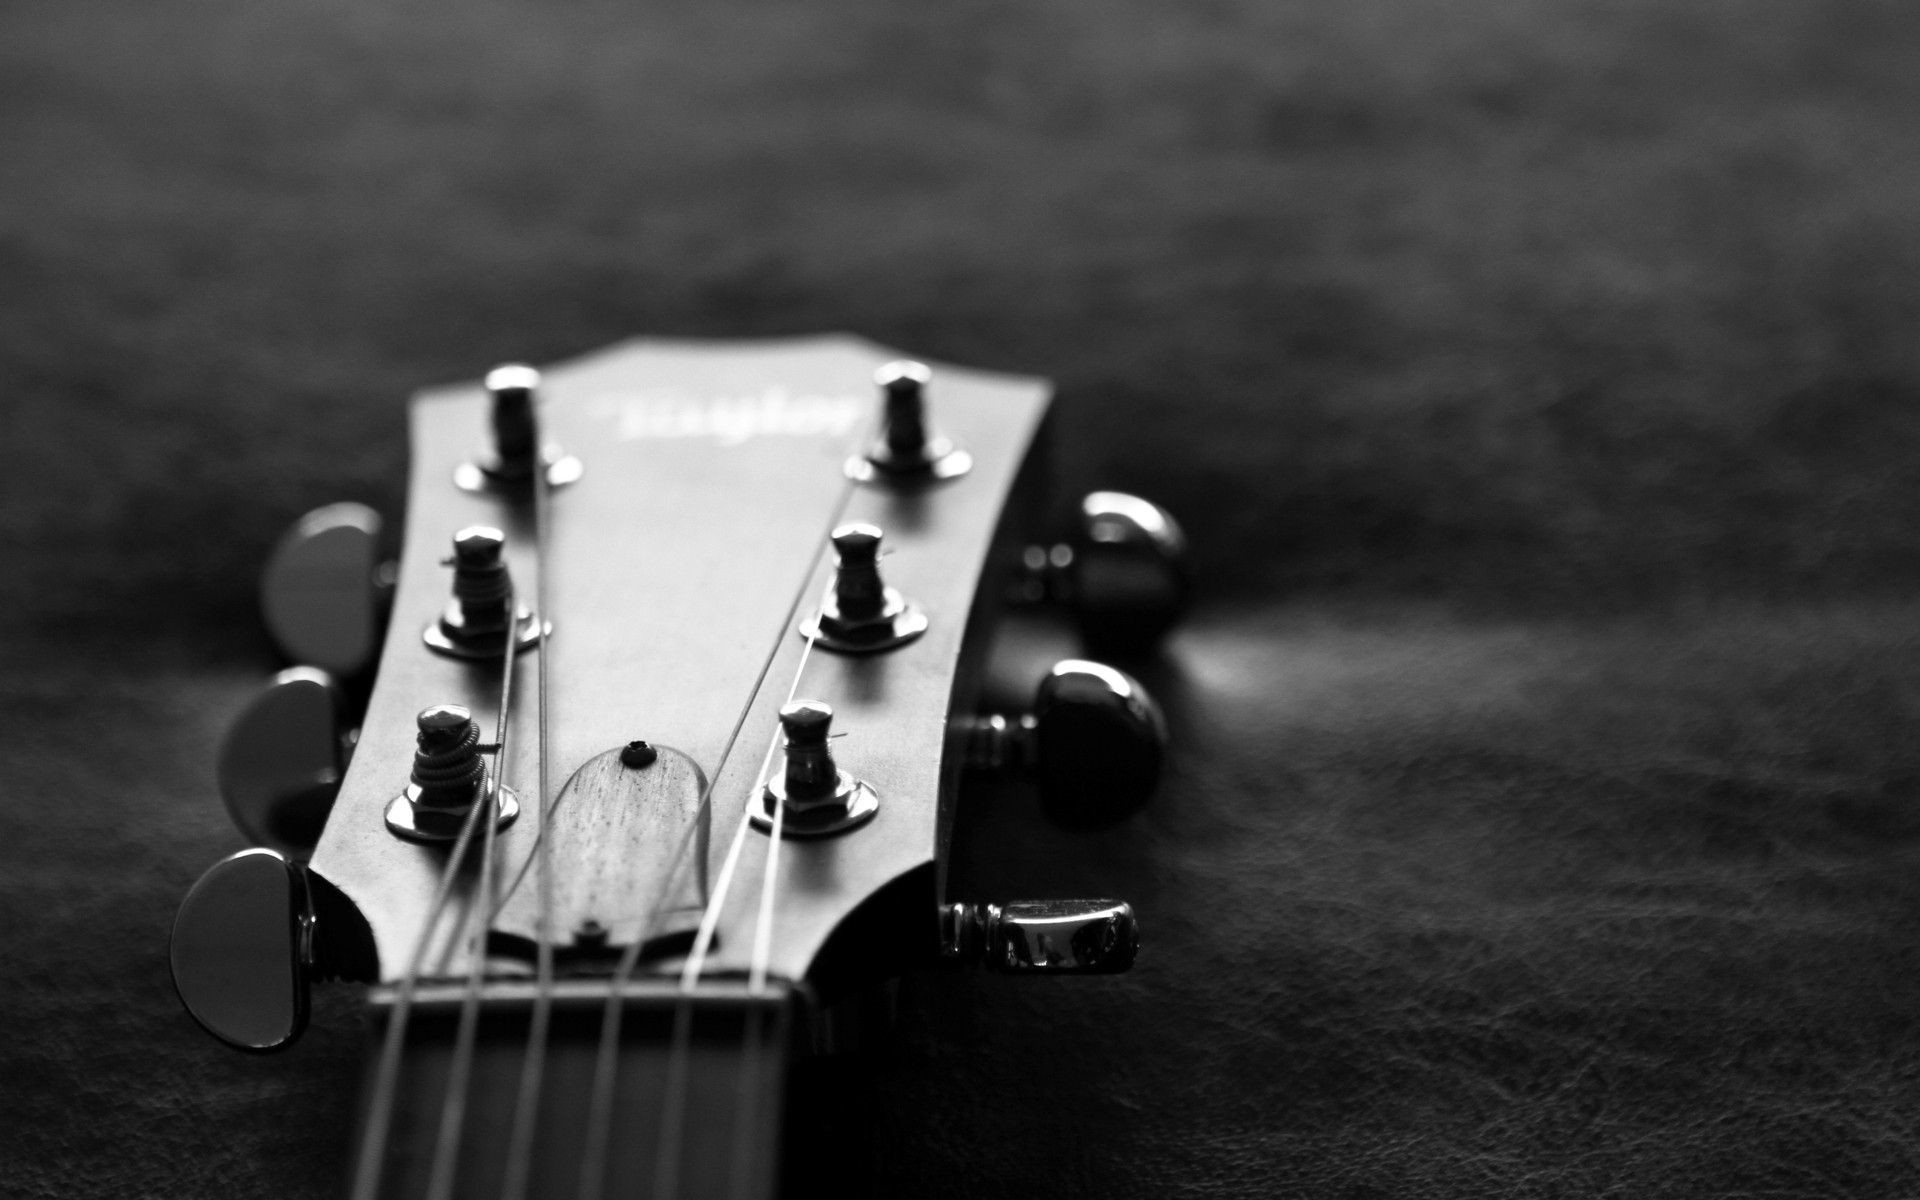 1920x1200   Cool Guitar Wallpapers | HD Wallpapers | Pinterest |  Guitars, Wallpaper and Hd wallpaper